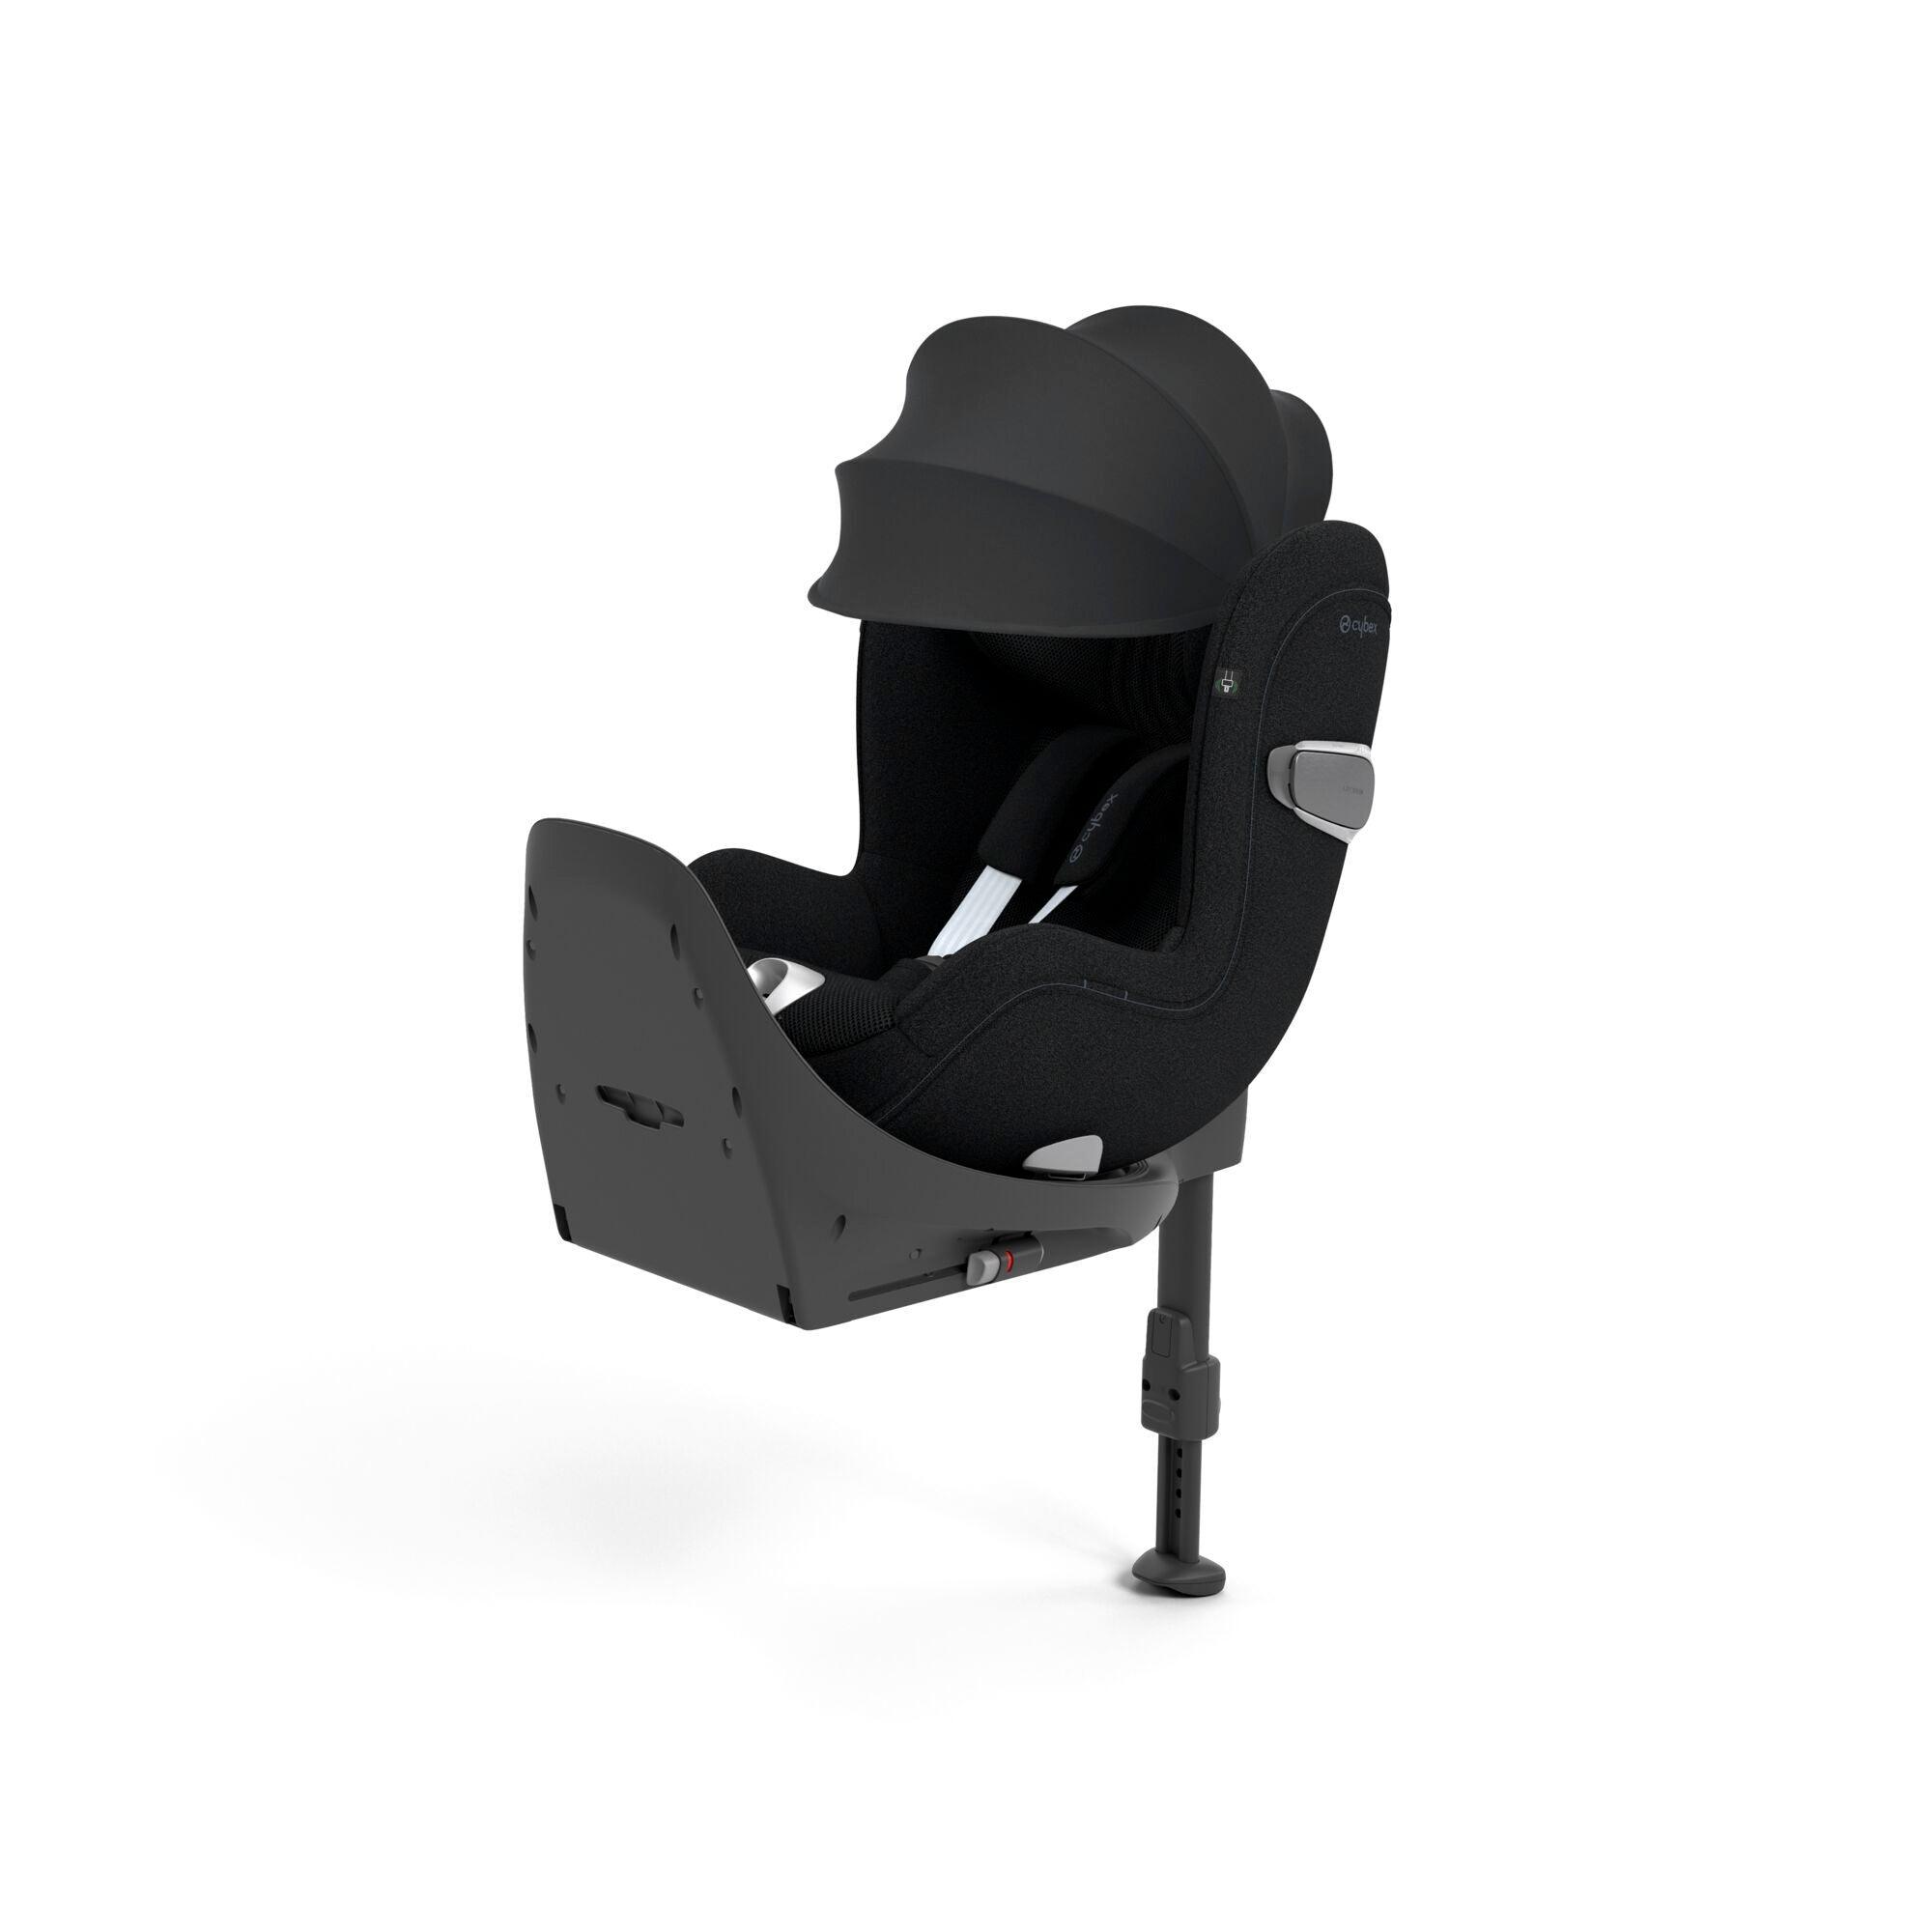 CYBEX Sirona T i-Size in Sepia Black Plus with a sun canopy, featuring a modern design for infant safety, including a 5-point harness and an adjustable support leg for vehicle stability.